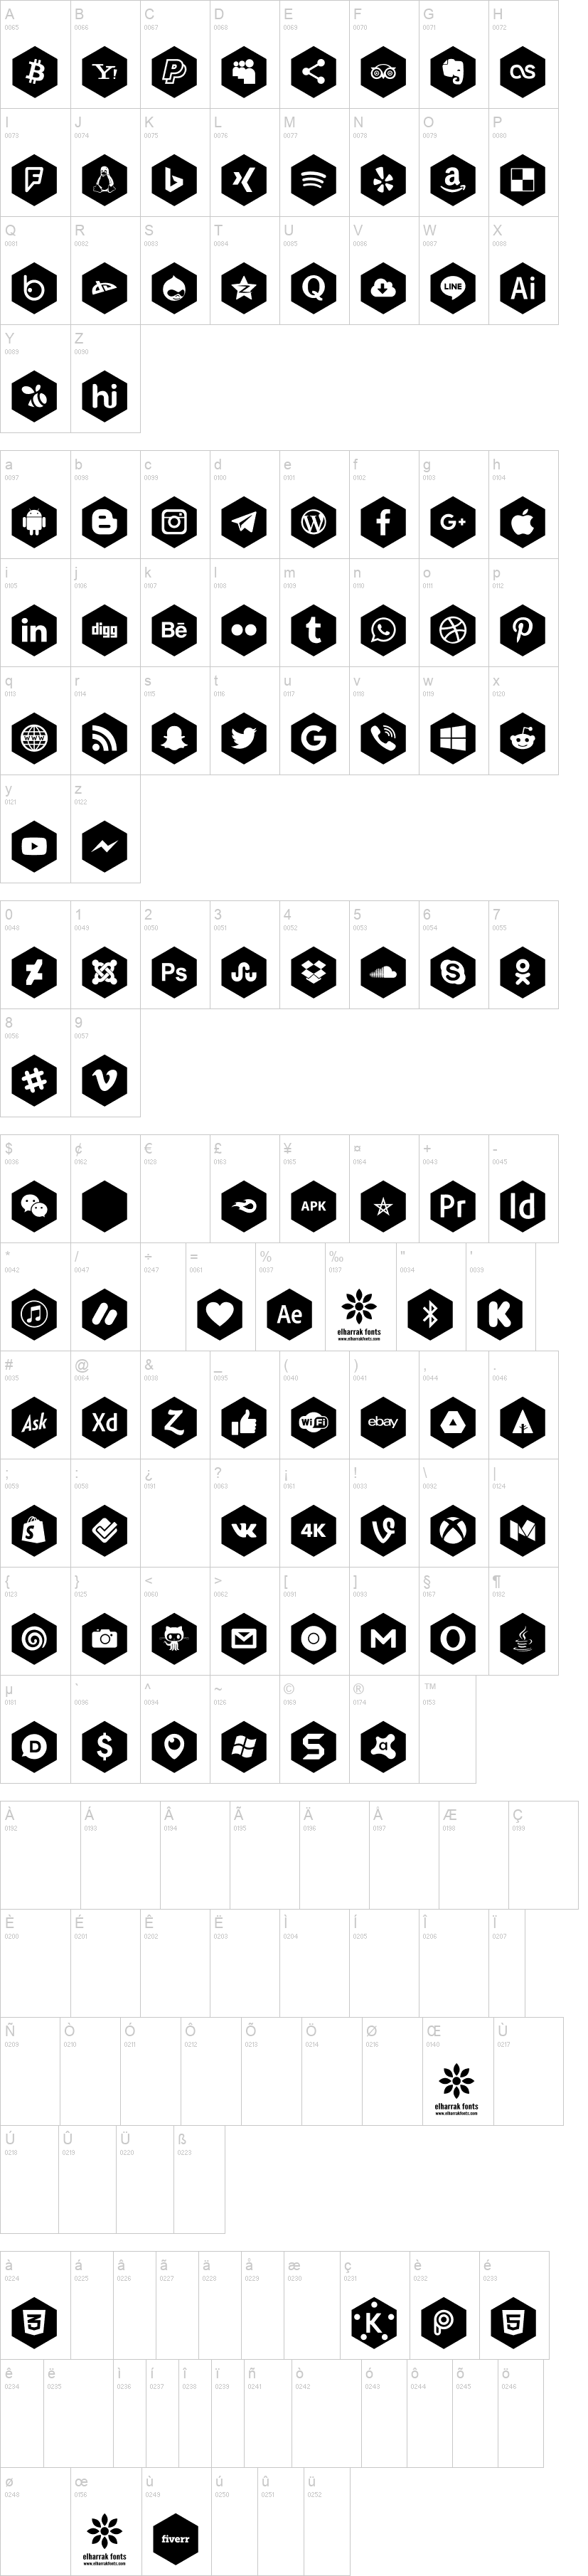 Font Icons 120